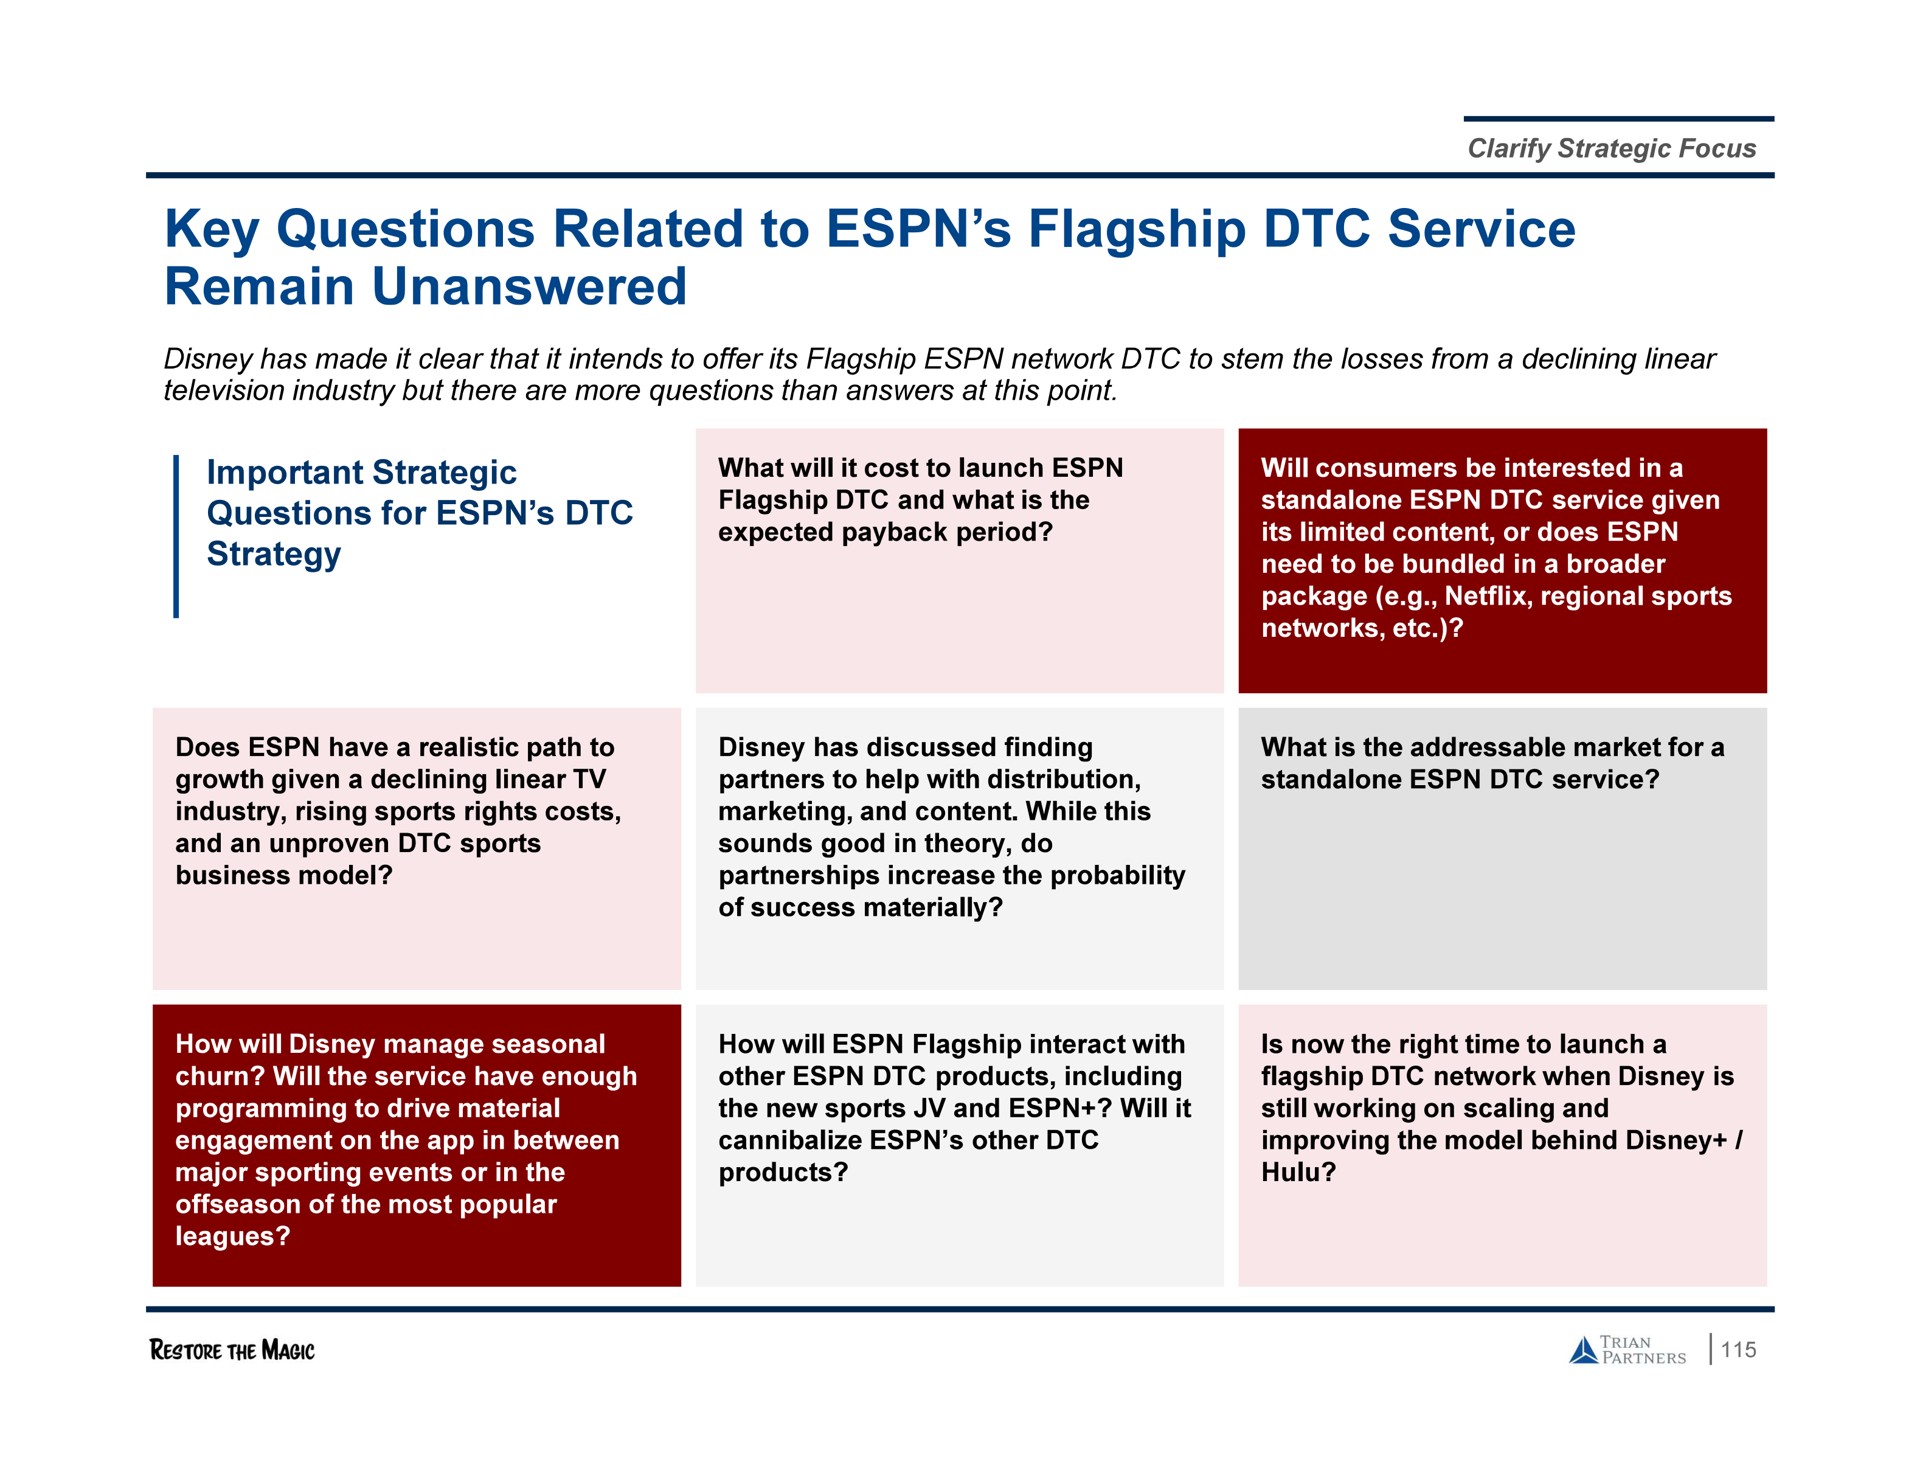 key questions related to flagship service remain unanswered | Trian Partners